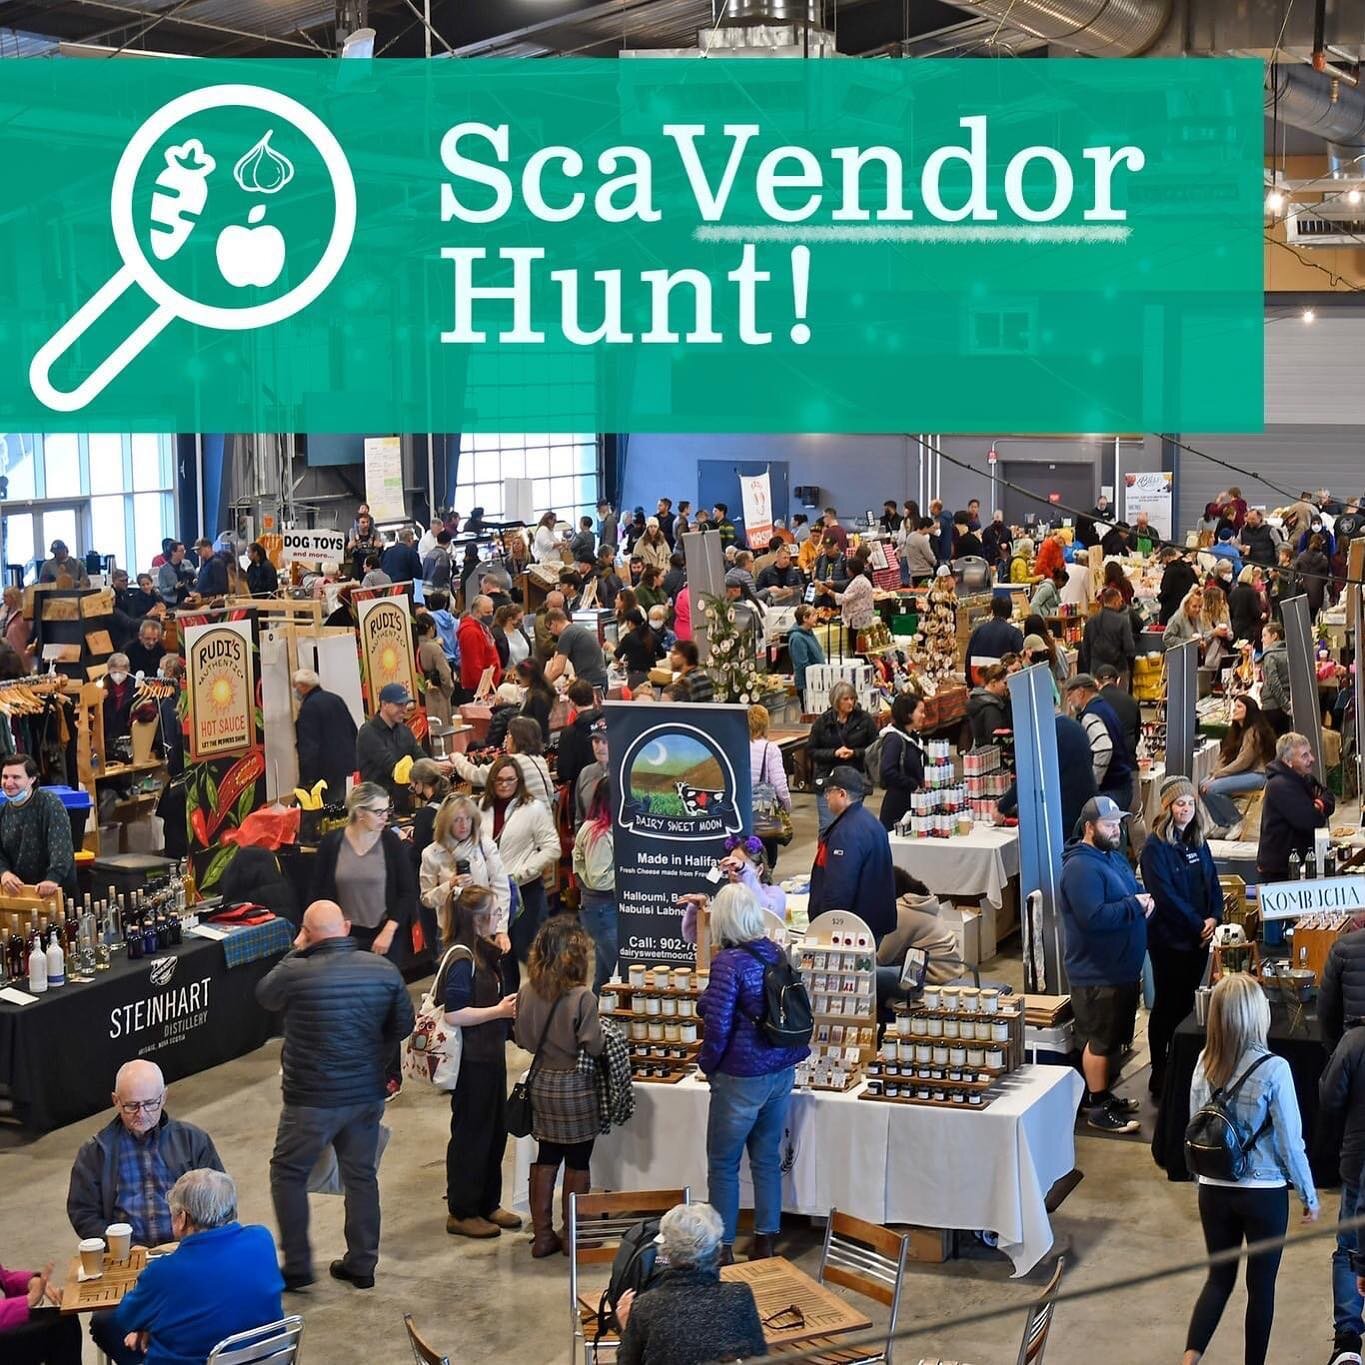 Come visit us tomorrow at the @hfxseaportmrkt and take part in the ScaVendor Hunt! 

How it works:
&bull; Participants will be given a ballot with five empty squares at the Customer Service desk or at vendor booths.
&bull; Visit your favourite vendor